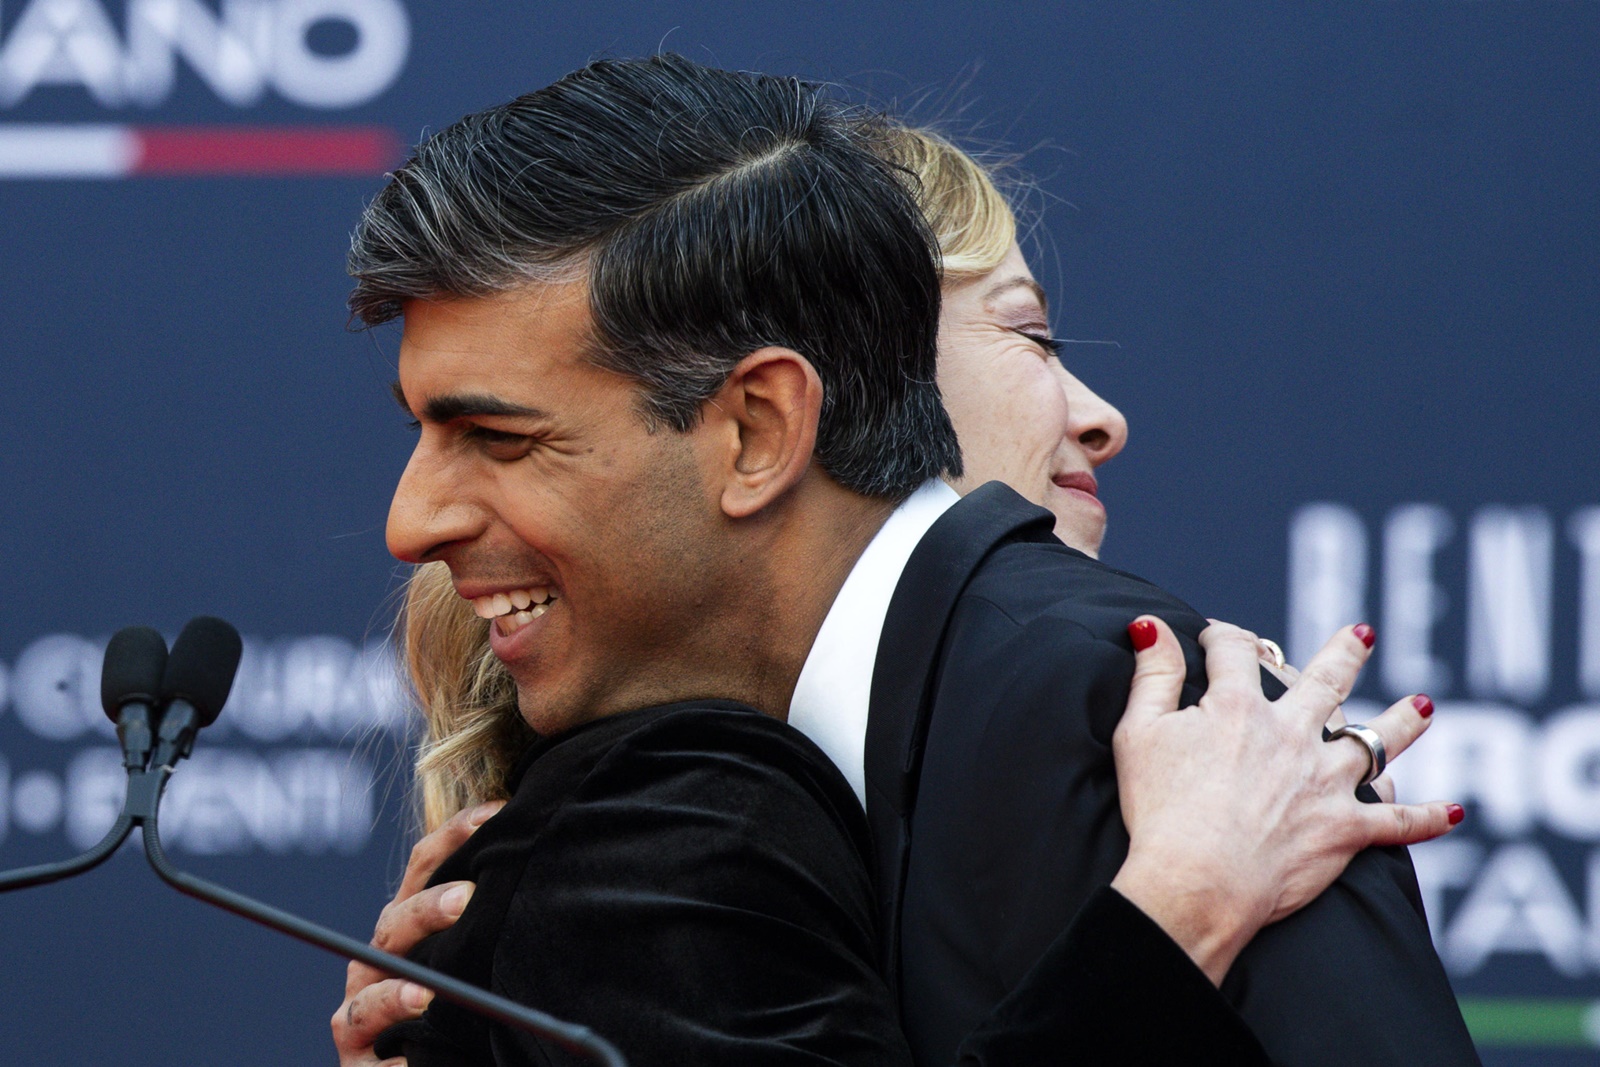 epa11032540 Italian Prime Minister Giorgia Meloni hugs British Prime Minister Rishi Sunak during the Atreju 2023 political festival in the gardens of Castel Sant'Angelo in Rome, Italy, 16 December 2023. The Atreju political festival in Rome was organized by Italian Prime Minister Meloni and her right-wing party, Brothers of Italy. The theme of this year's edition is 'Welcome Back Italian Pride' (Bentornato orgoglio italiano).  EPA/ANGELO CARCONI